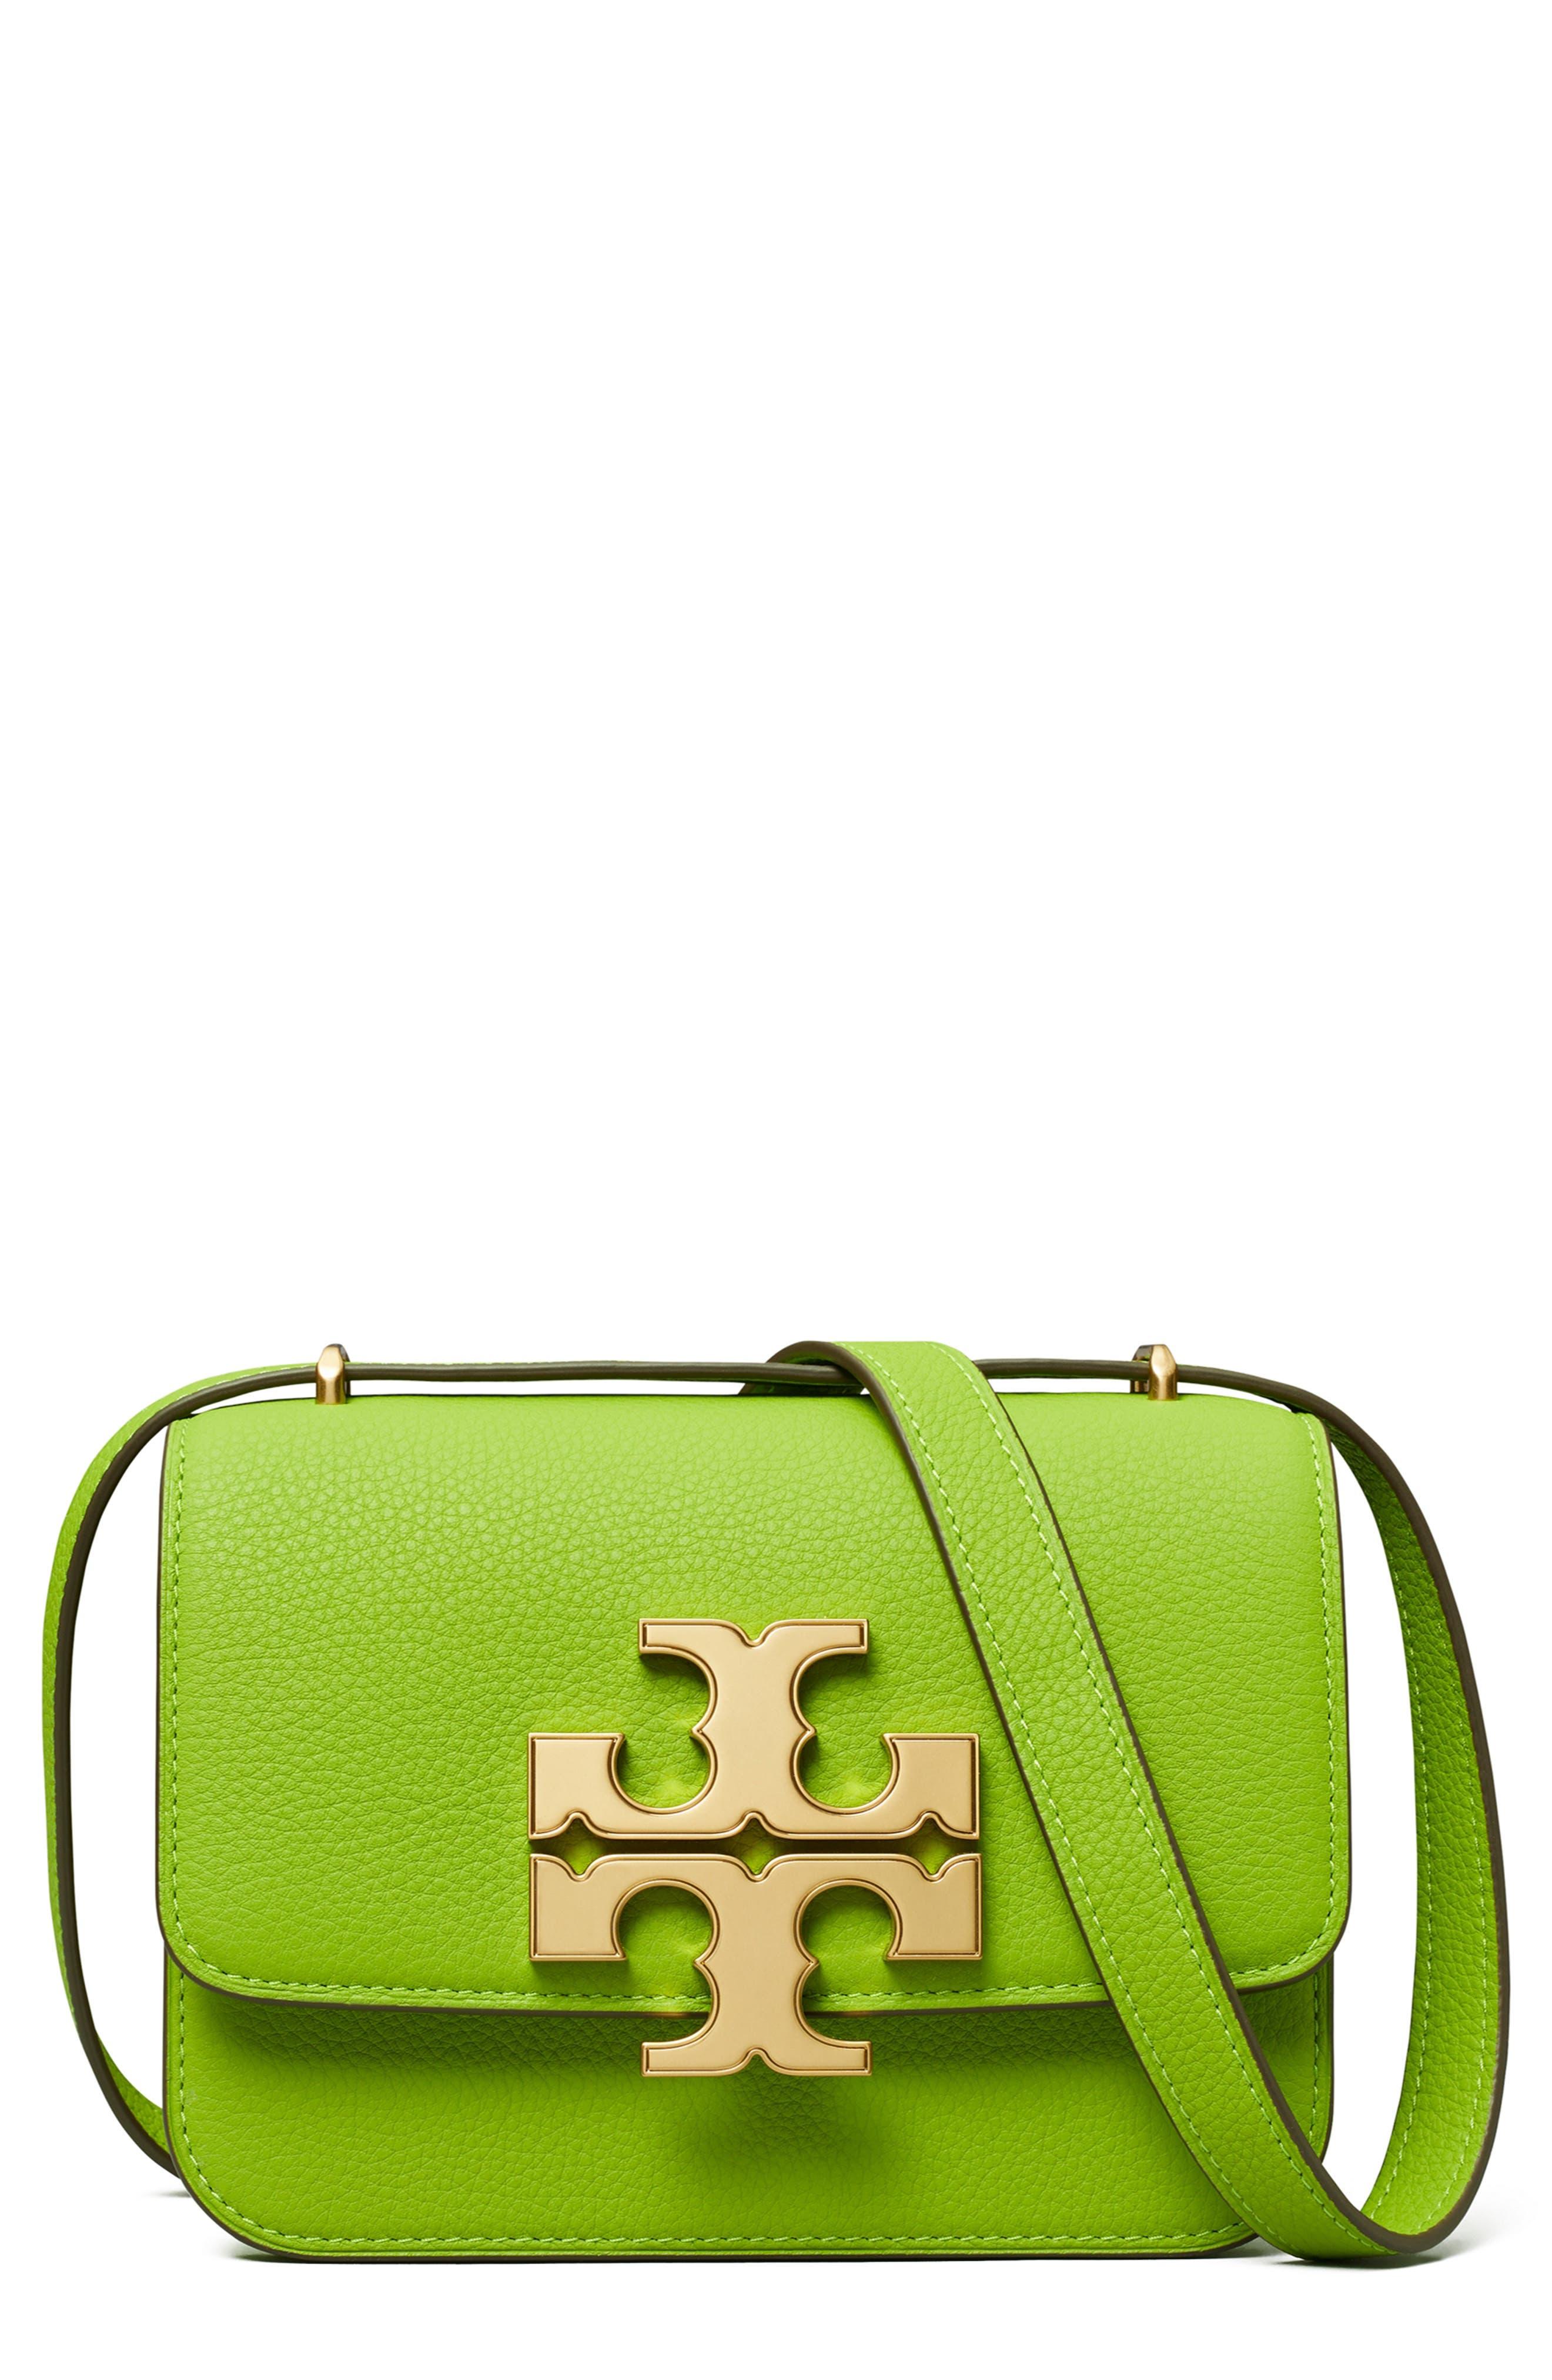 Tory Burch Small Eleanor Pebble Leather Convertible Shoulder Bag in Green |  Lyst